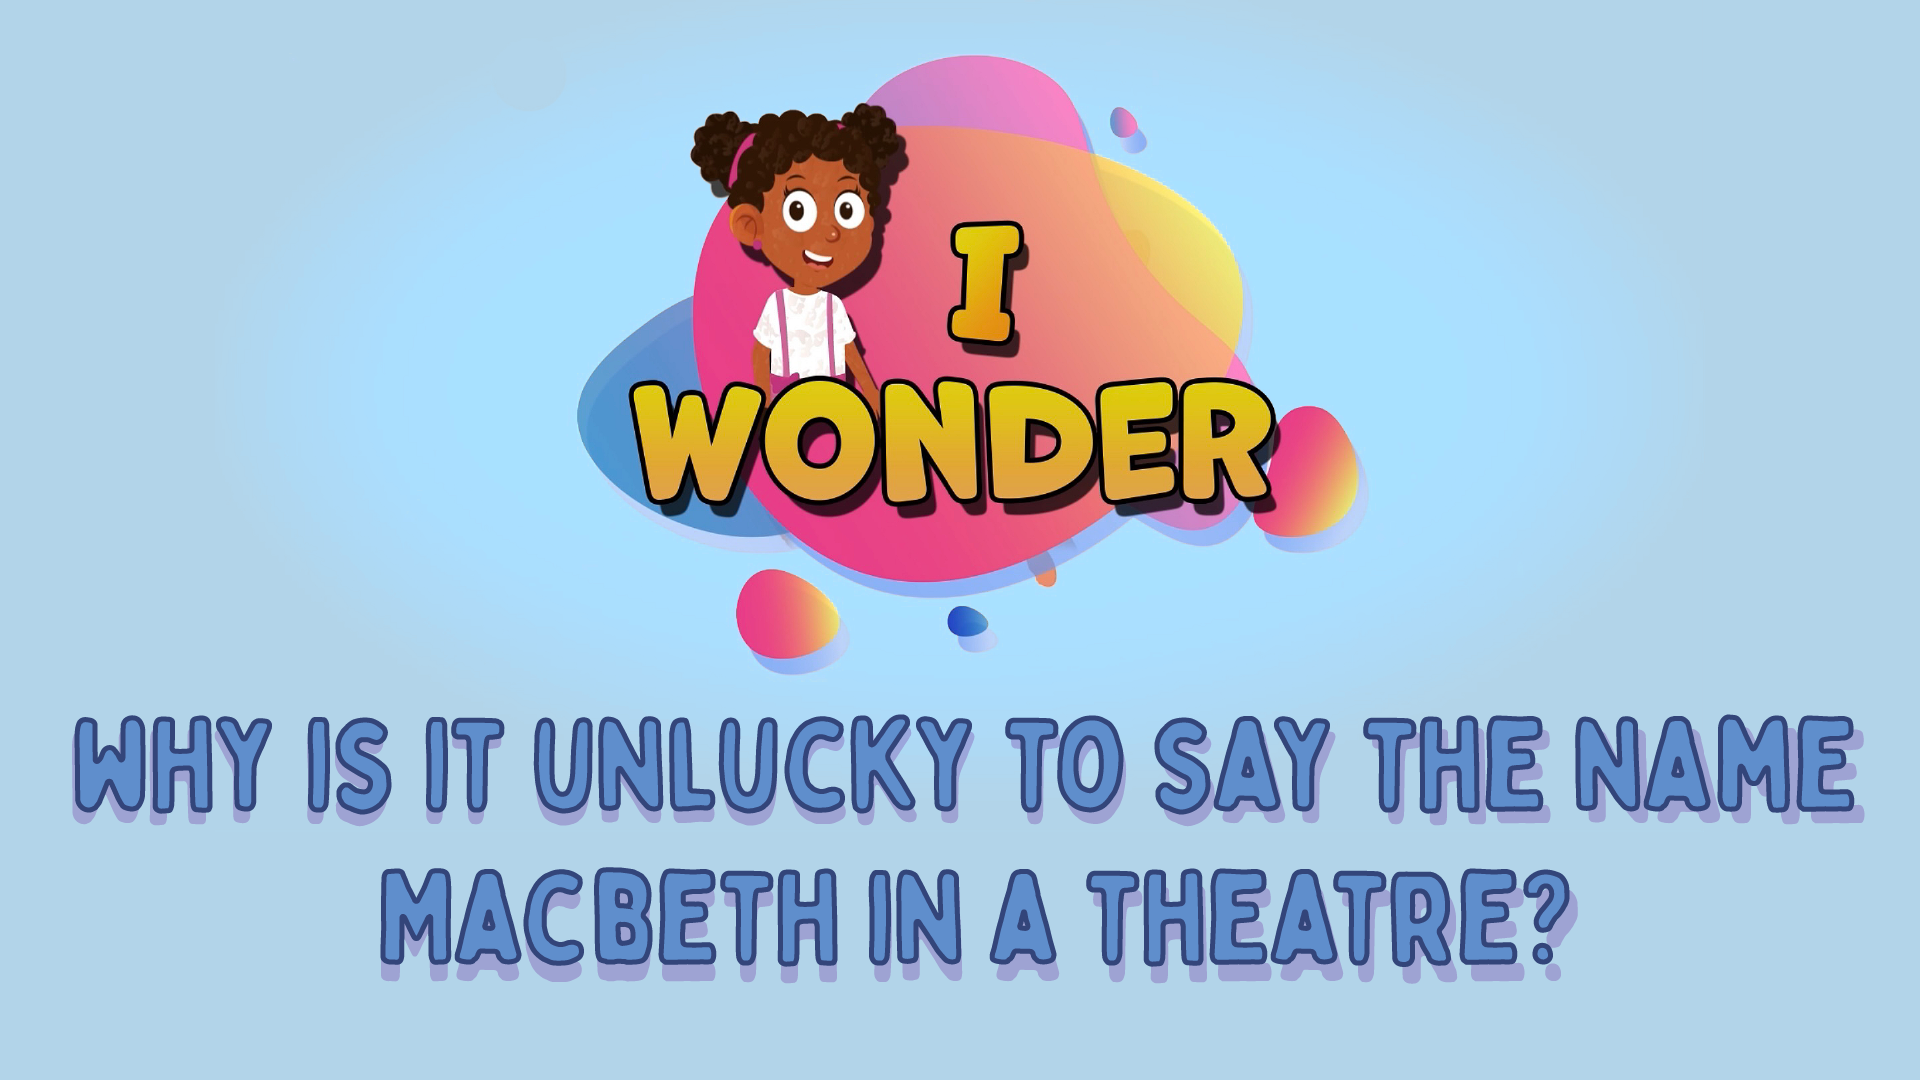 why is it unlucky to say the name macbeth in a theatre